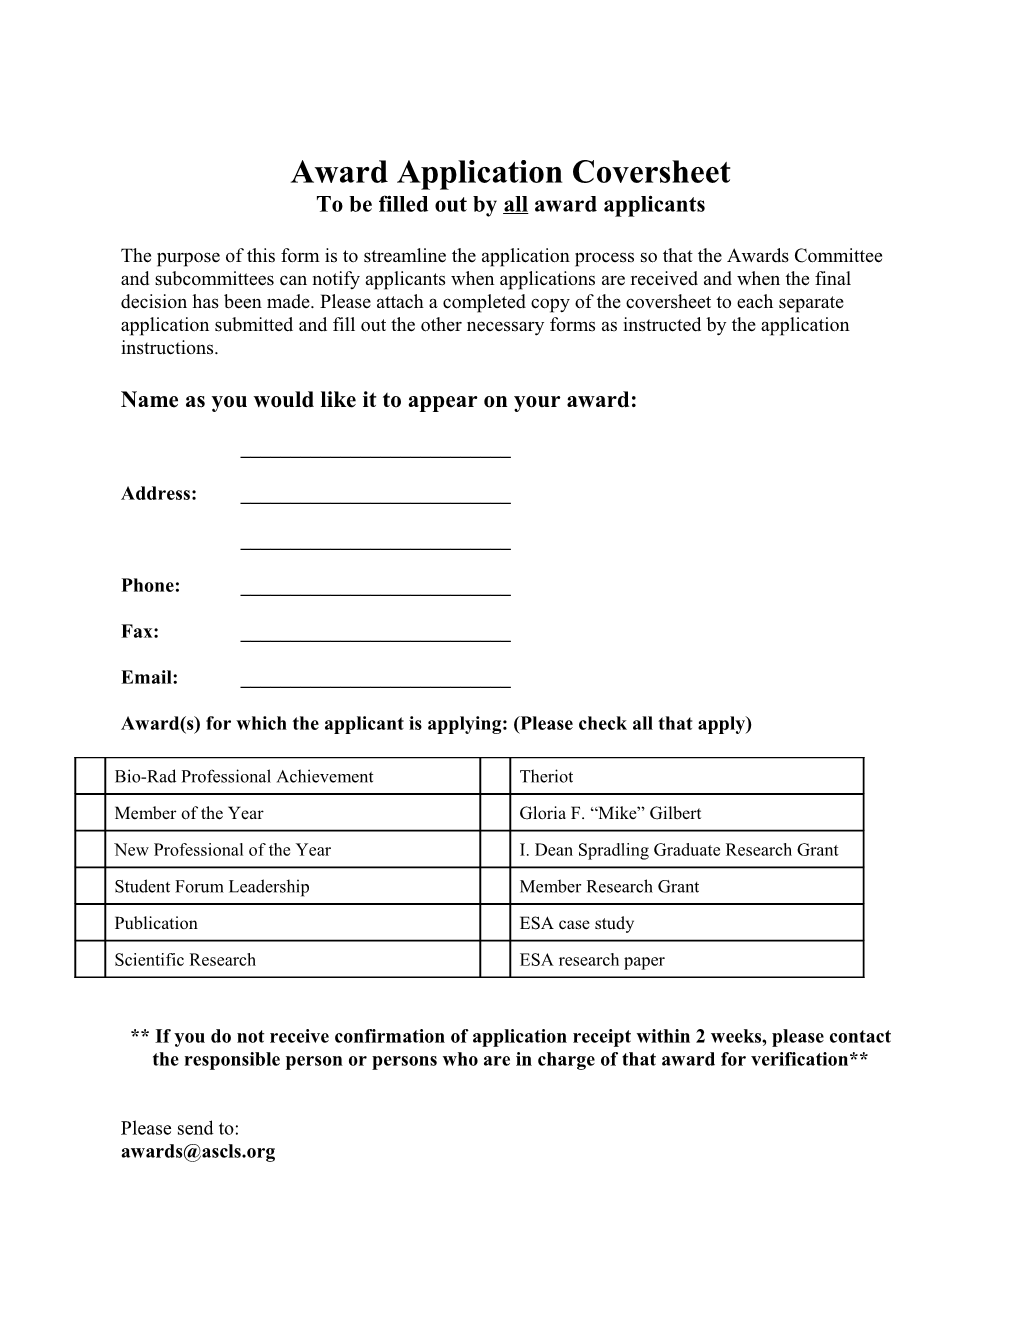 To Be Filled out by All Award Applicants